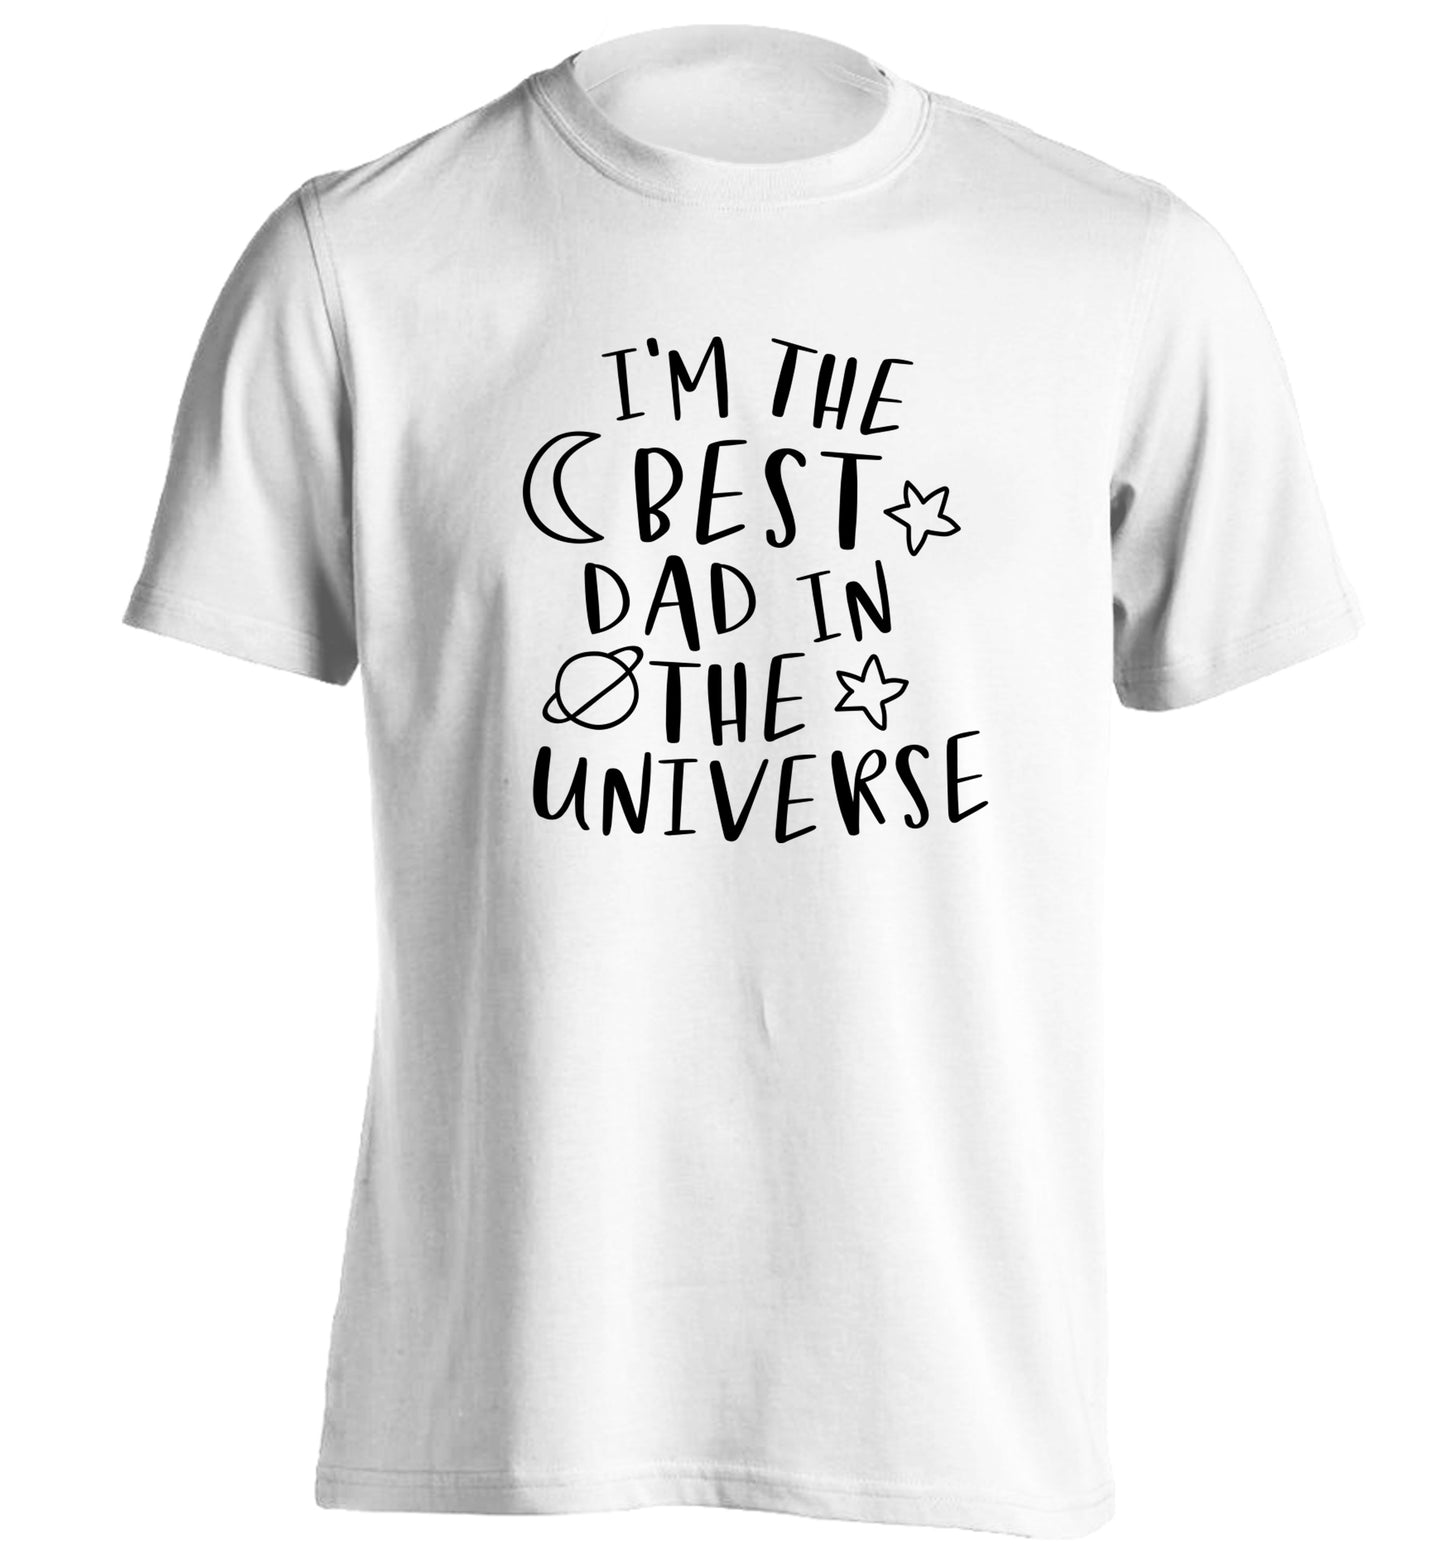 I'm the best dad in the universe adults unisex white Tshirt 2XL